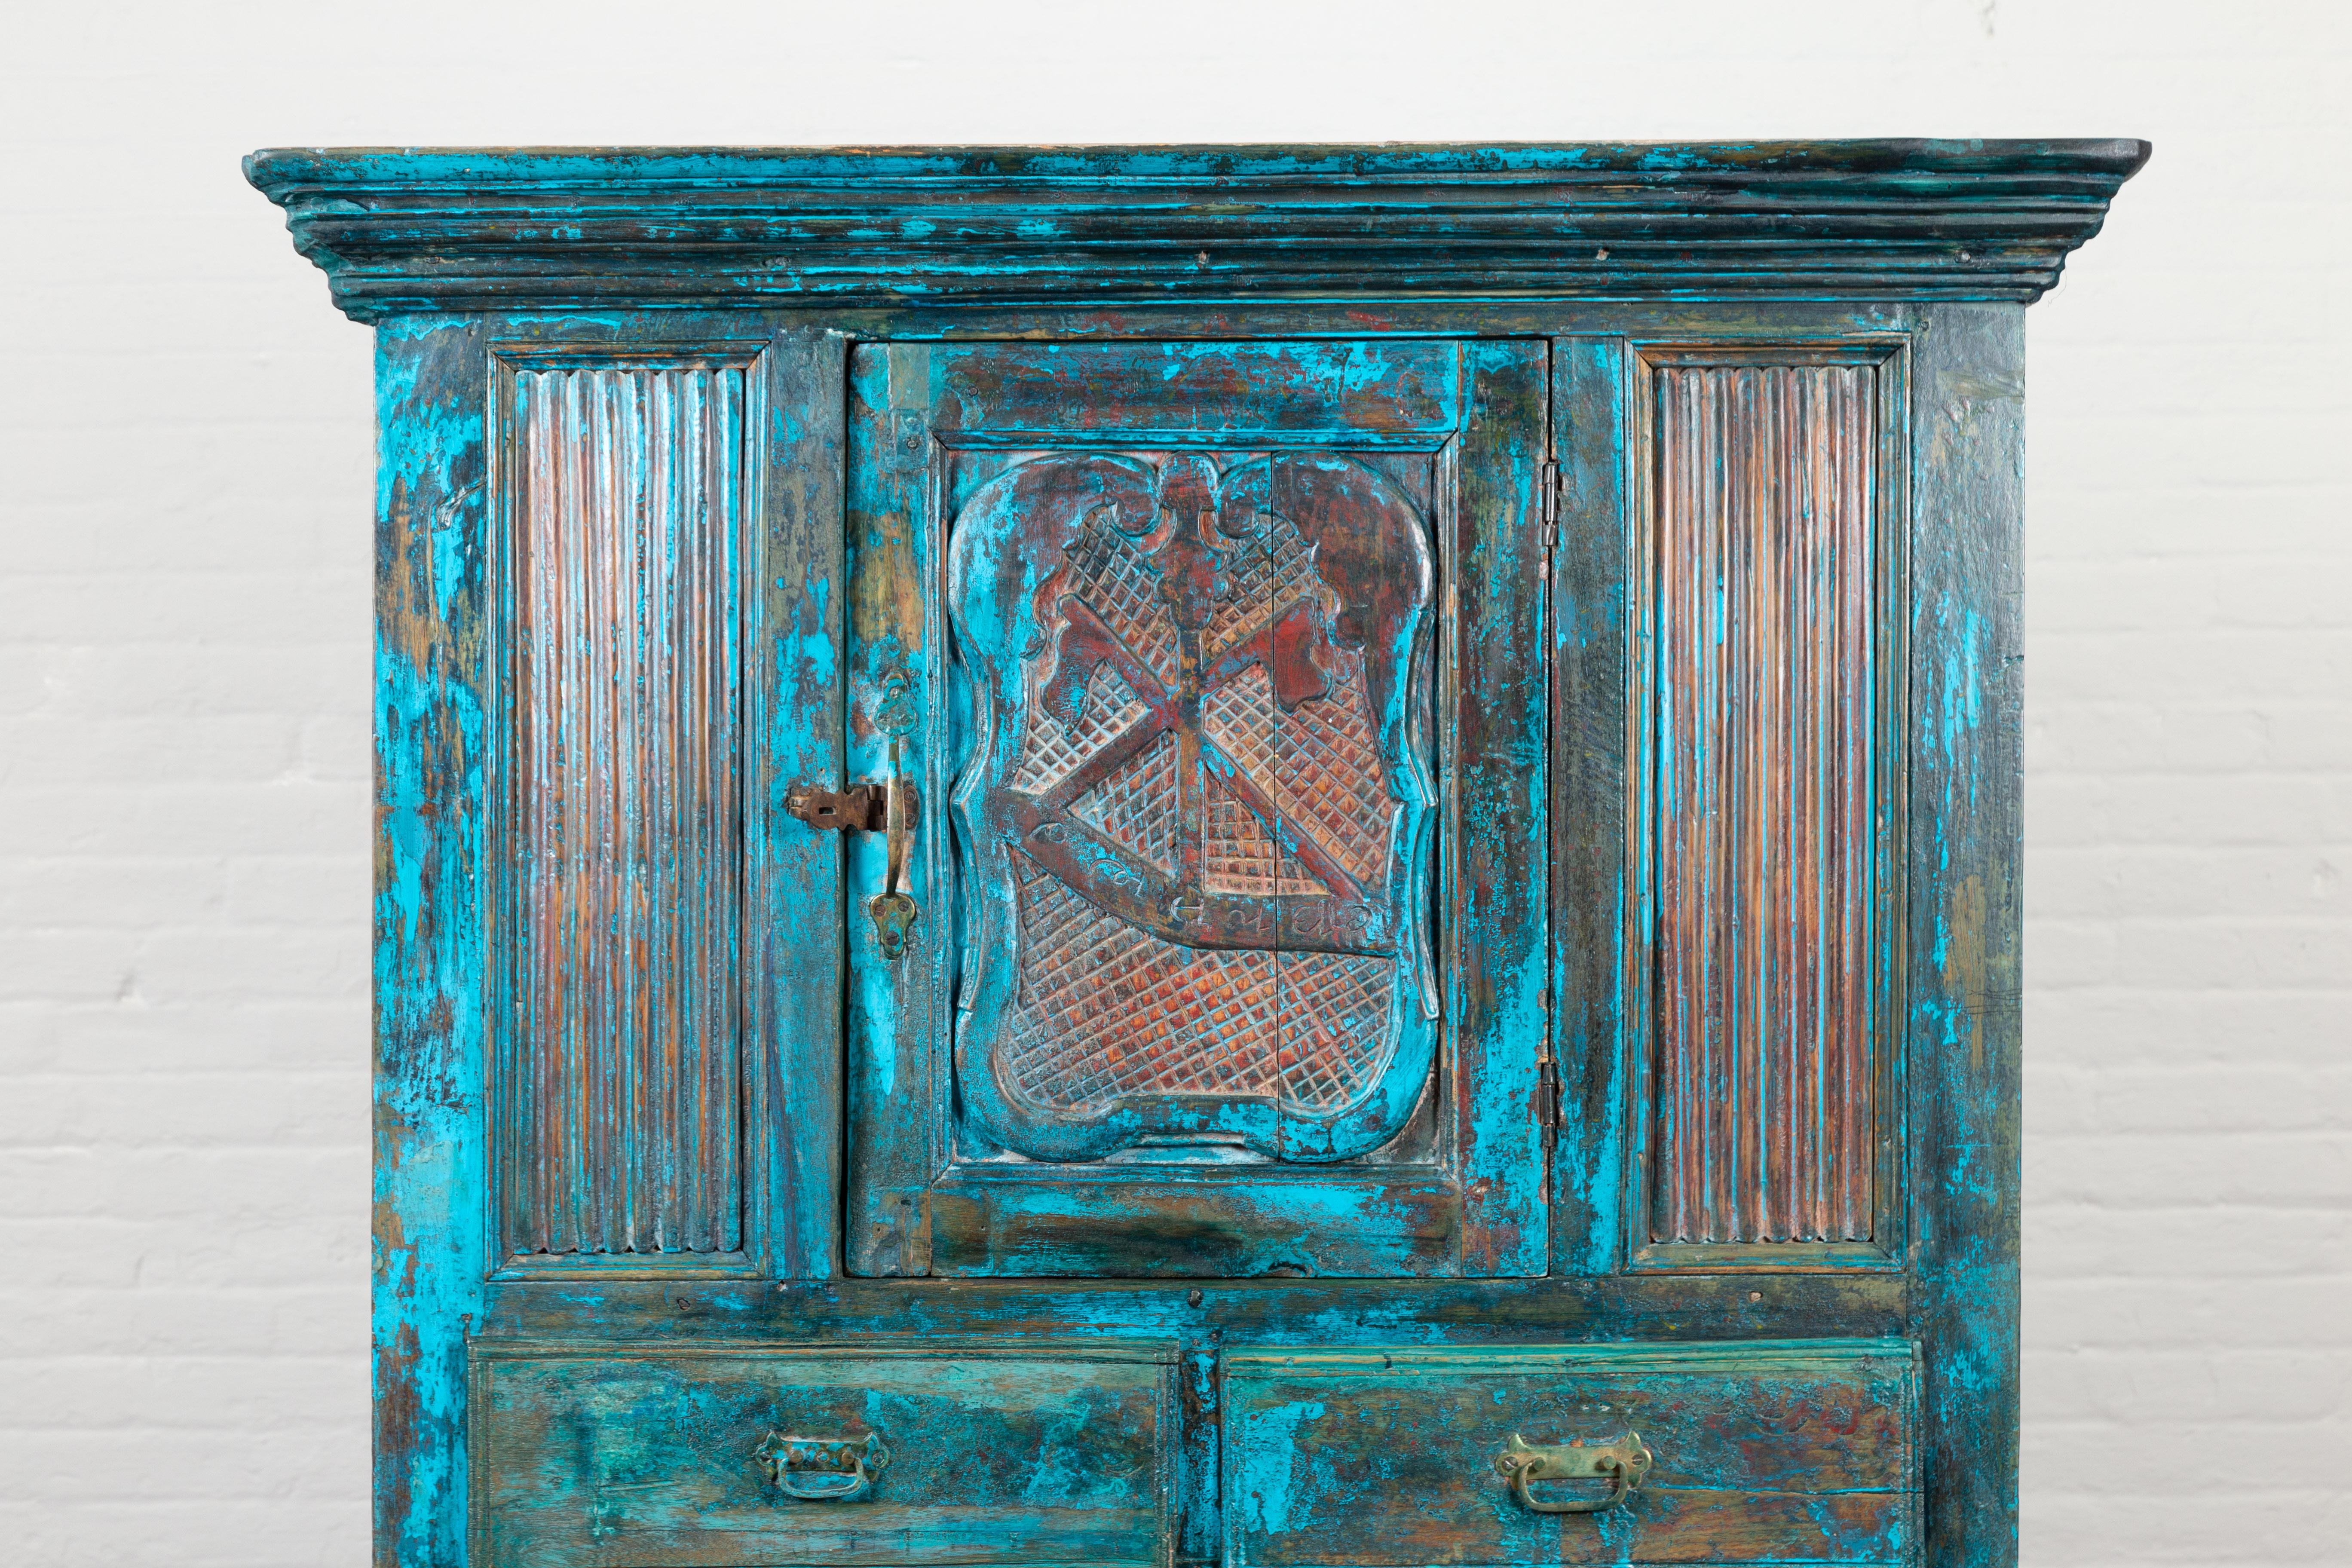 Indian 19th Century Royal Teal Painted Cabinet with Carved Doors and Two Drawers In Good Condition For Sale In Yonkers, NY